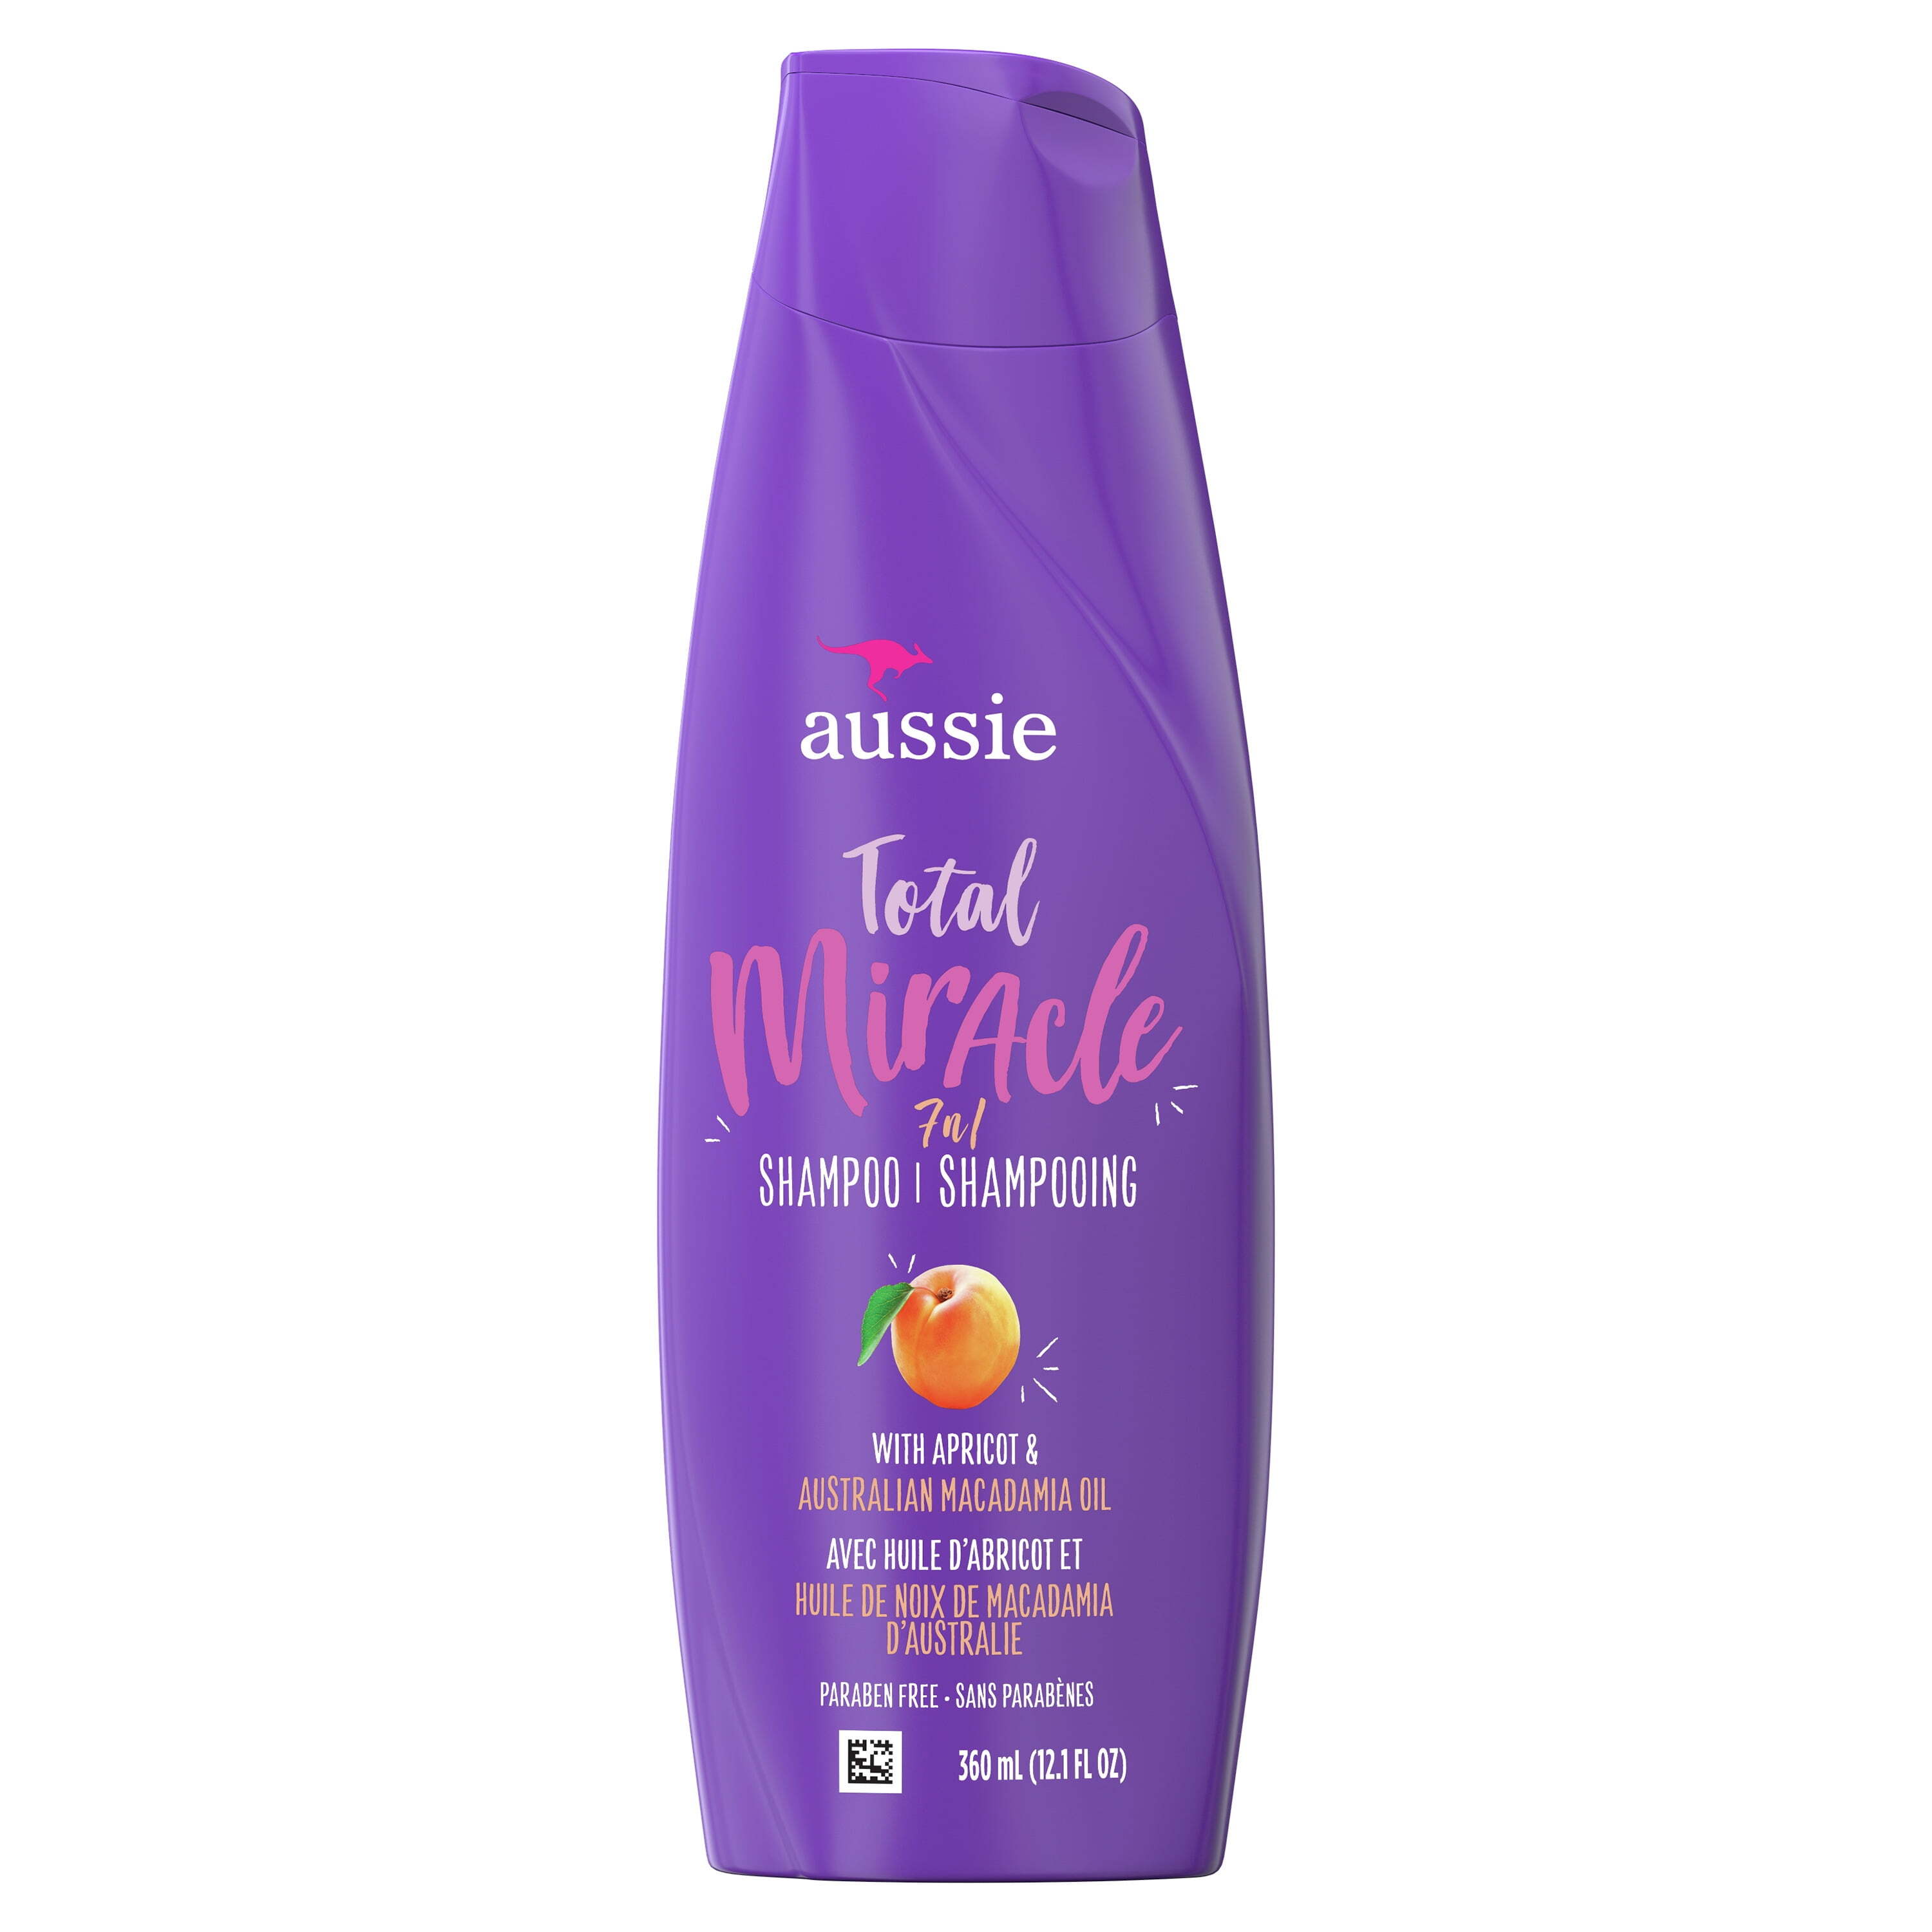 Aussie Total Miracle Shampoo for All Hair Types 12.1 fl oz - image 1 of 8